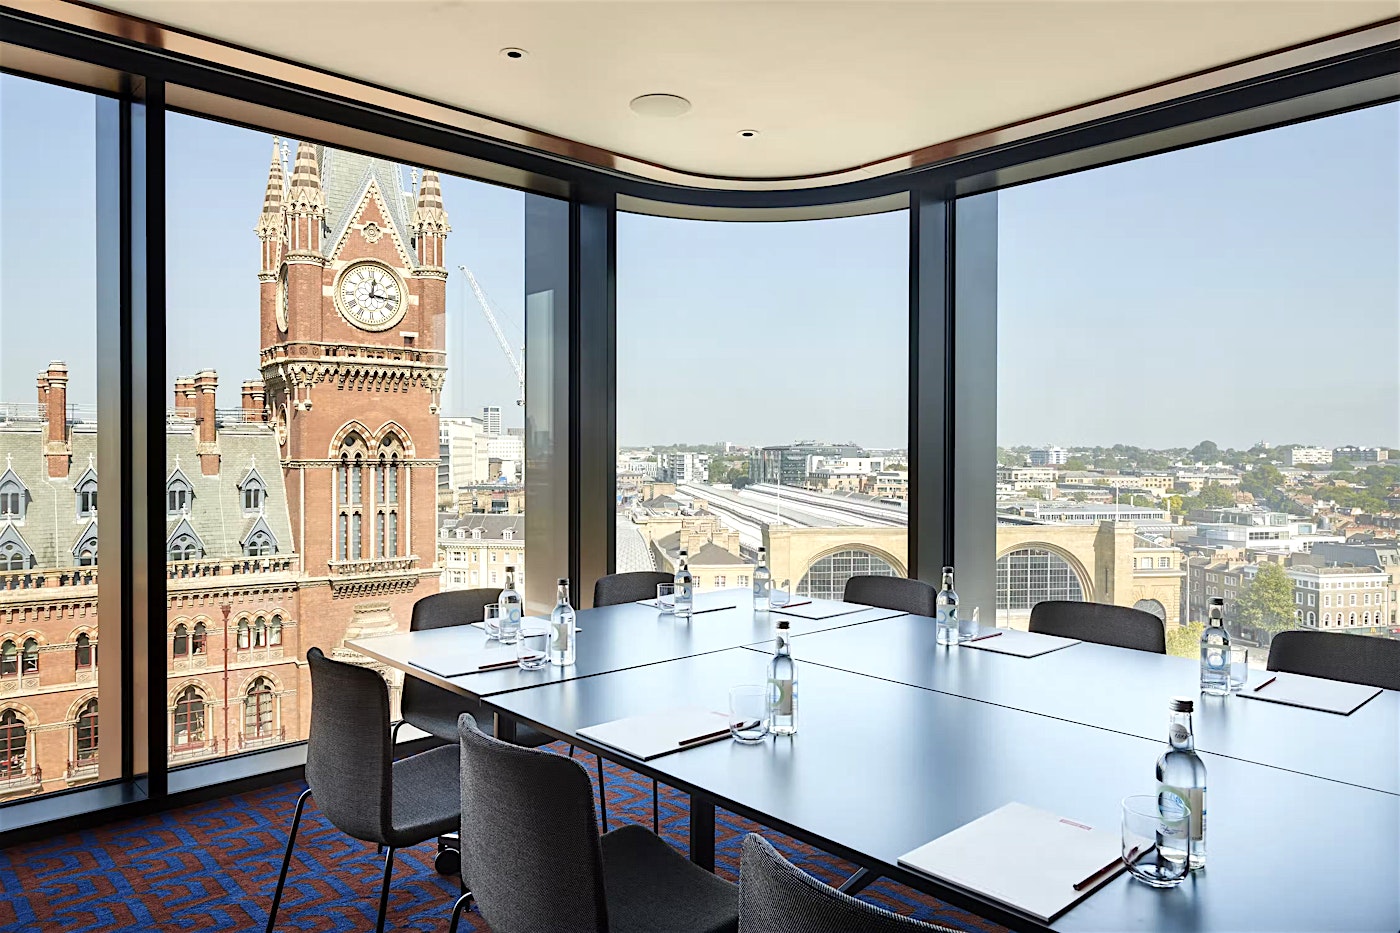 Views of St. Pancras from the Standard Hotel's meeting room